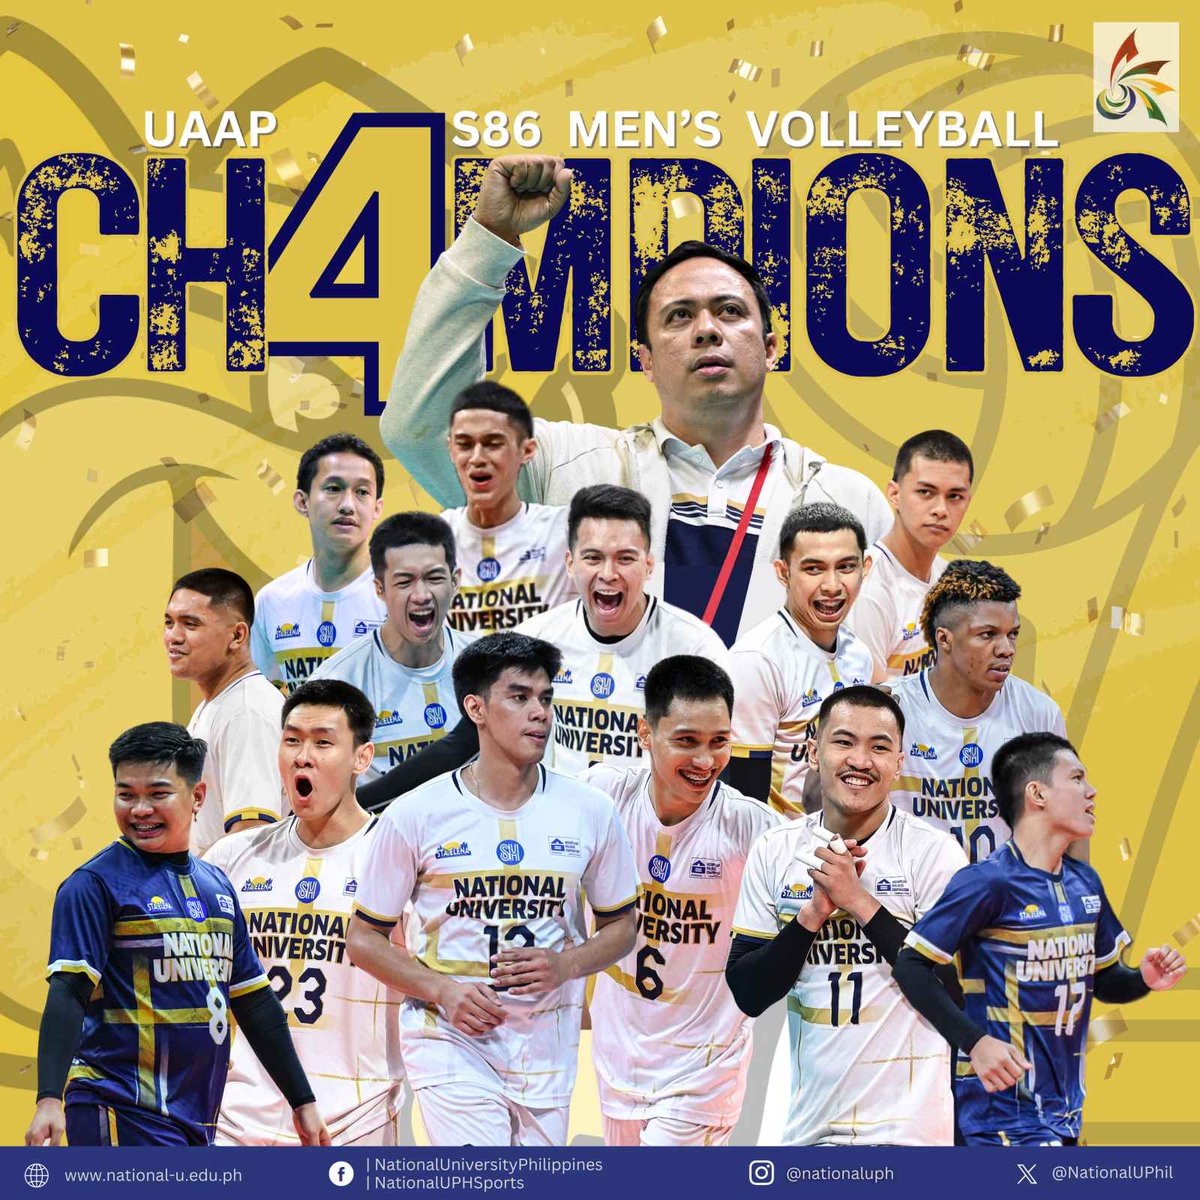 FOUR-PEAT CHAMPS! 💛💙

The NU Men’s Volleyball team brought Jhocson its 4th consecutive Championship title following their Finals sweep against UST, 25-21, 22-25, 25-17, 25-15, today at the Mall of Asia Arena.

📷: UAAP Media Bureau, James Lapuz
#GoBulldogs #UAAPSeason86